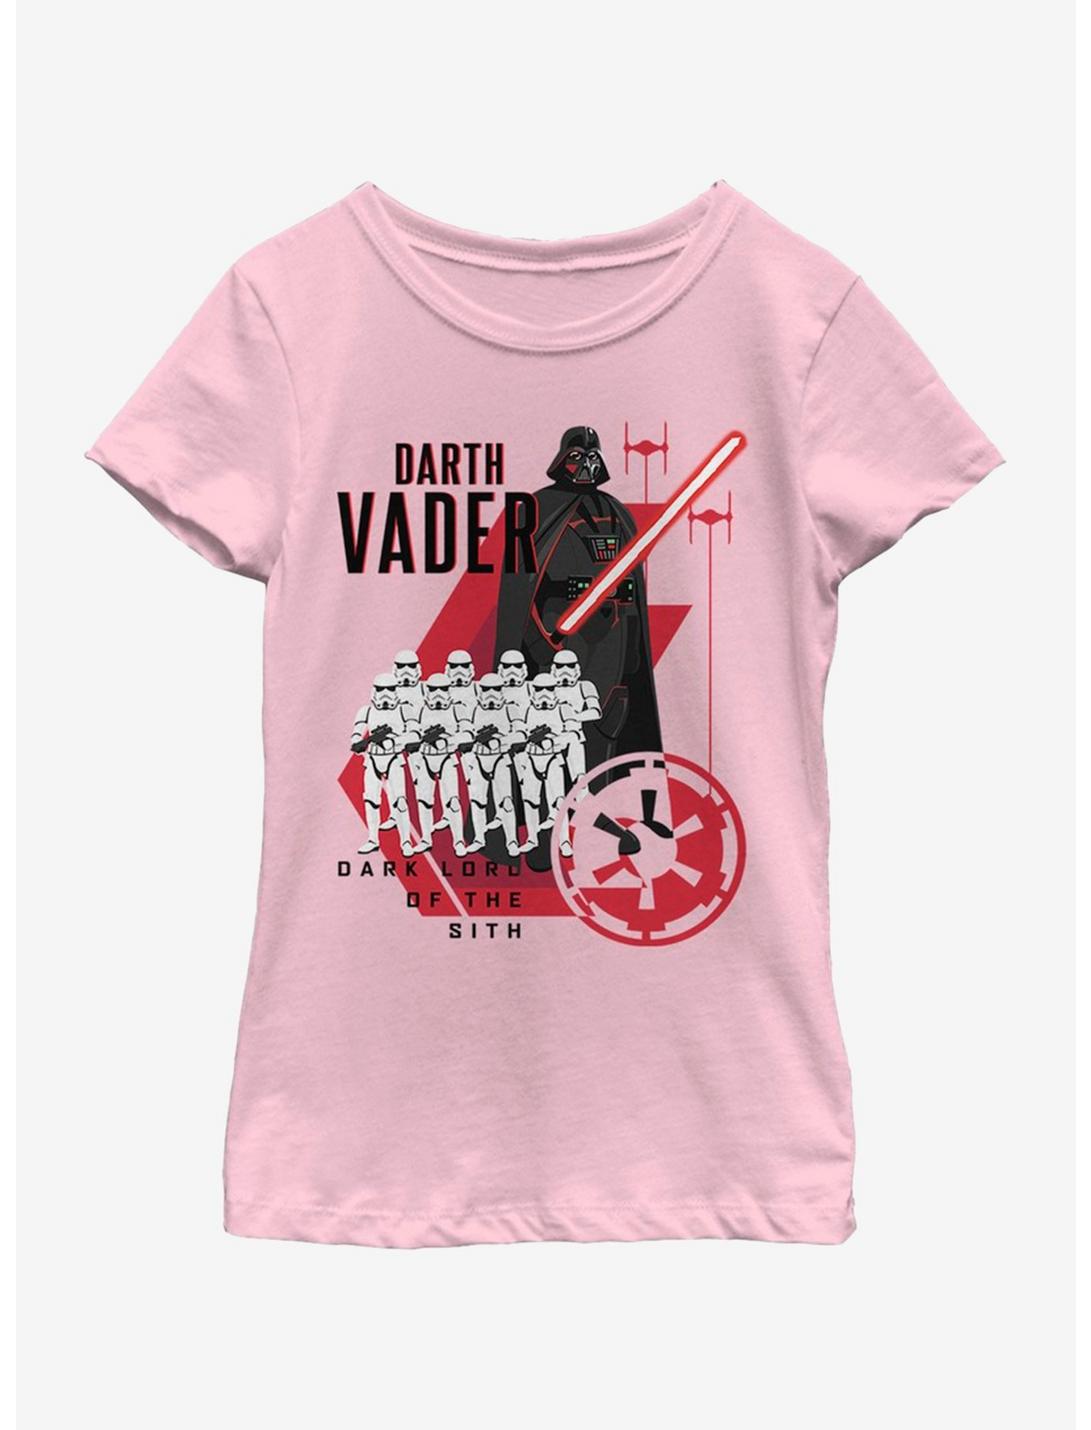 Star Wars Lord of Sith Youth Girls T-Shirt, PINK, hi-res